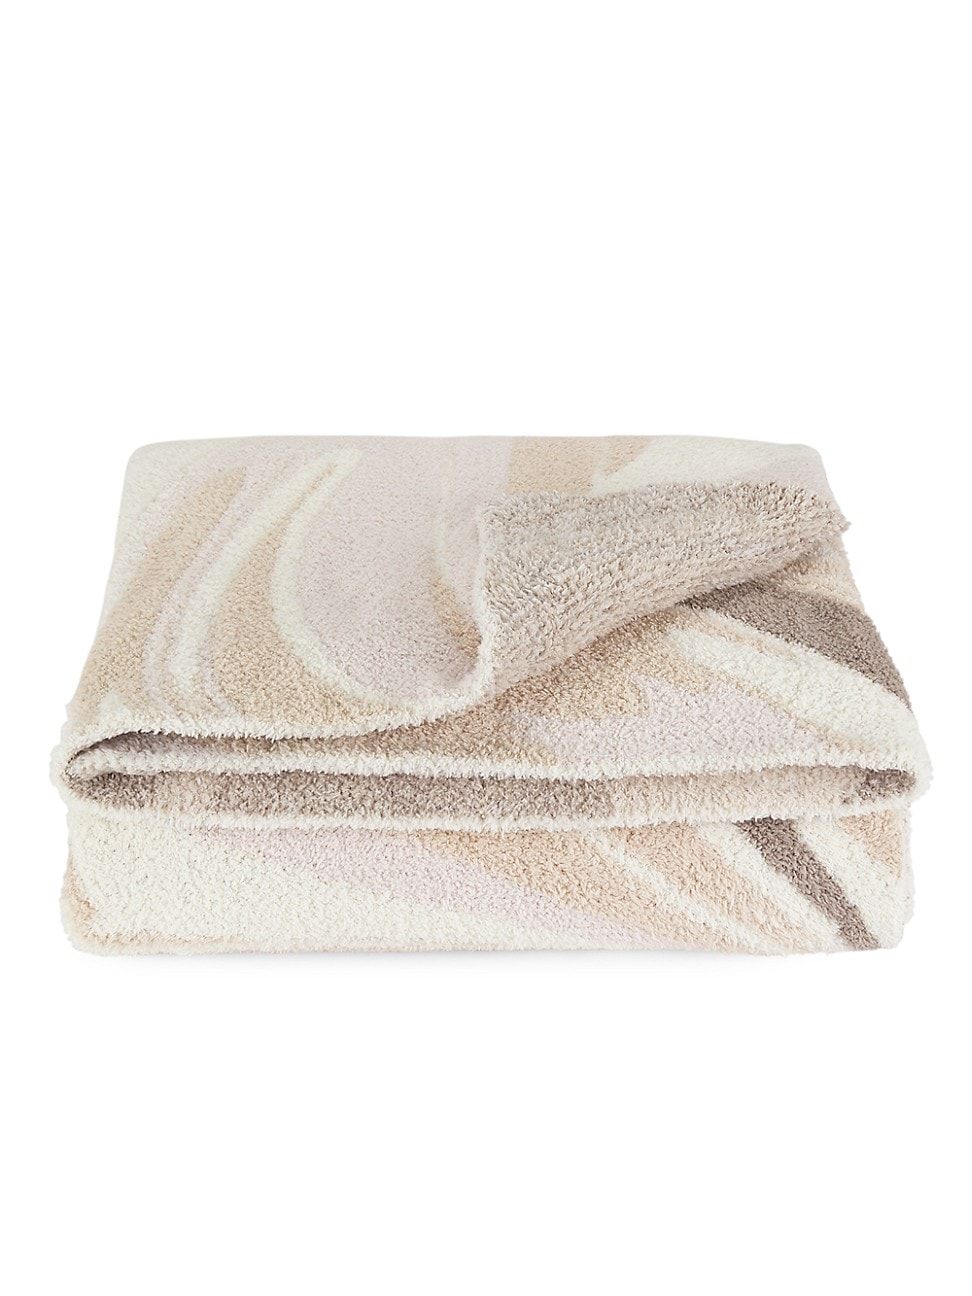 CozyChic Marbled Blanket - Sand Multi | Saks Fifth Avenue